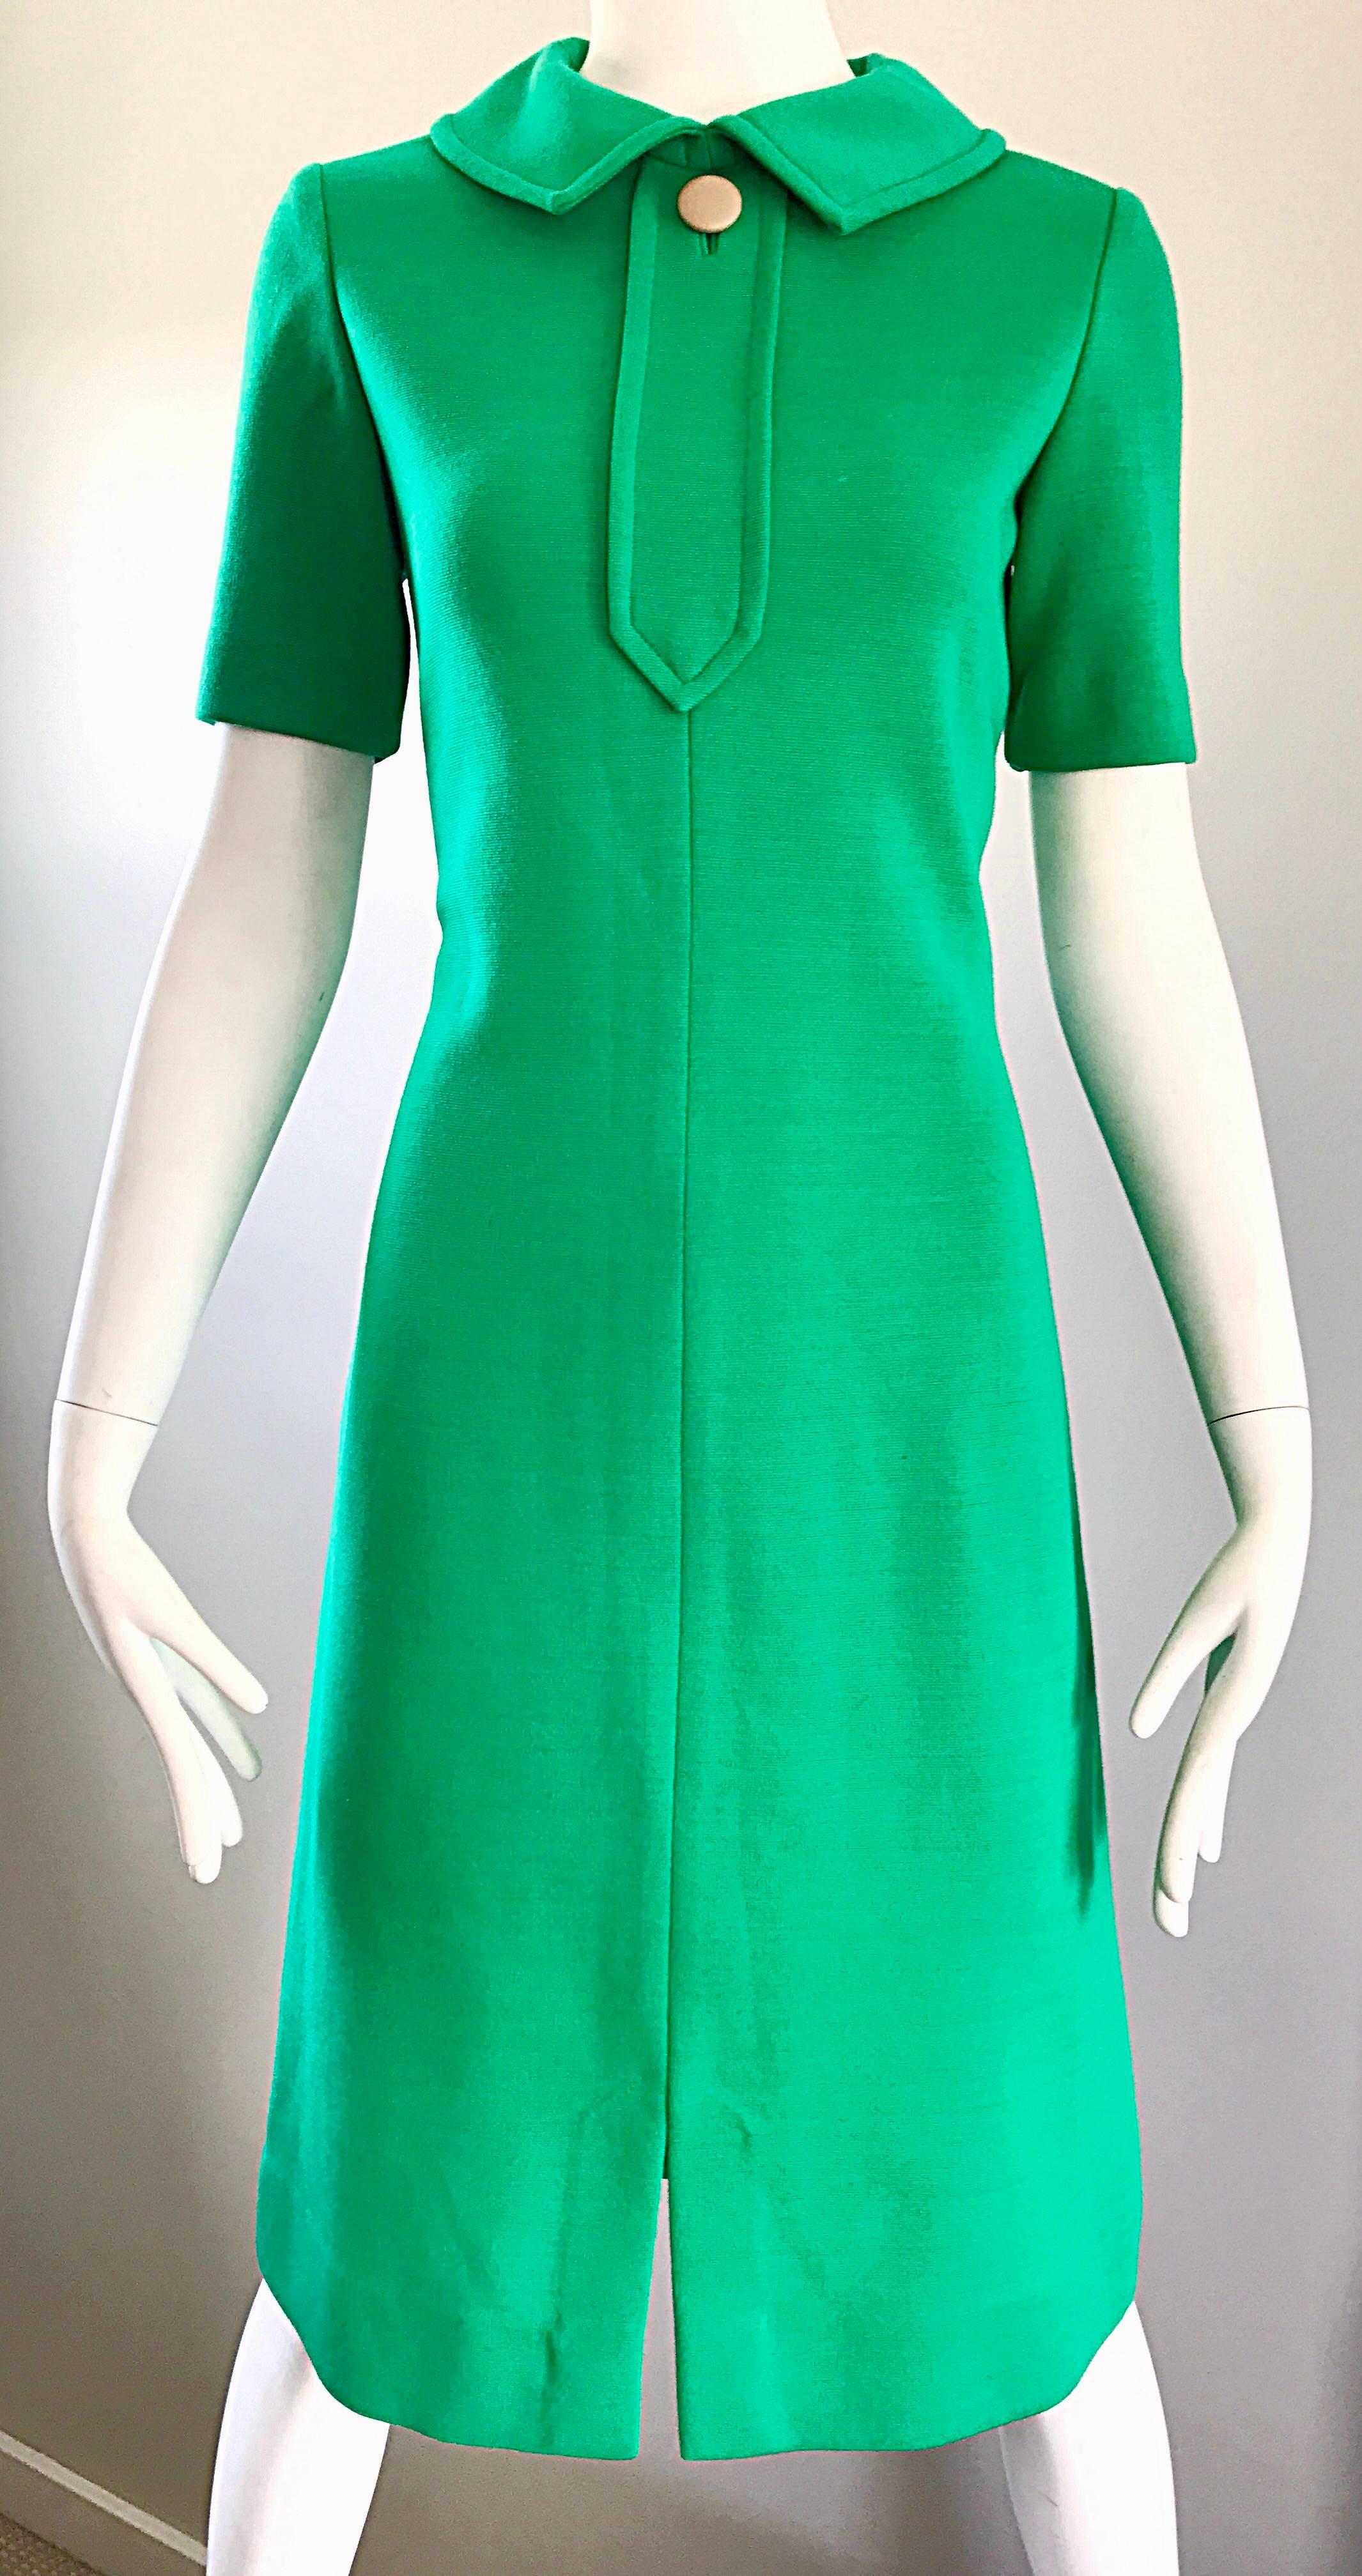 1960s Kelly Green Virgin Wool Knit 60s Vintage Mod Short Sleeve Shift Dress  In Excellent Condition For Sale In San Diego, CA